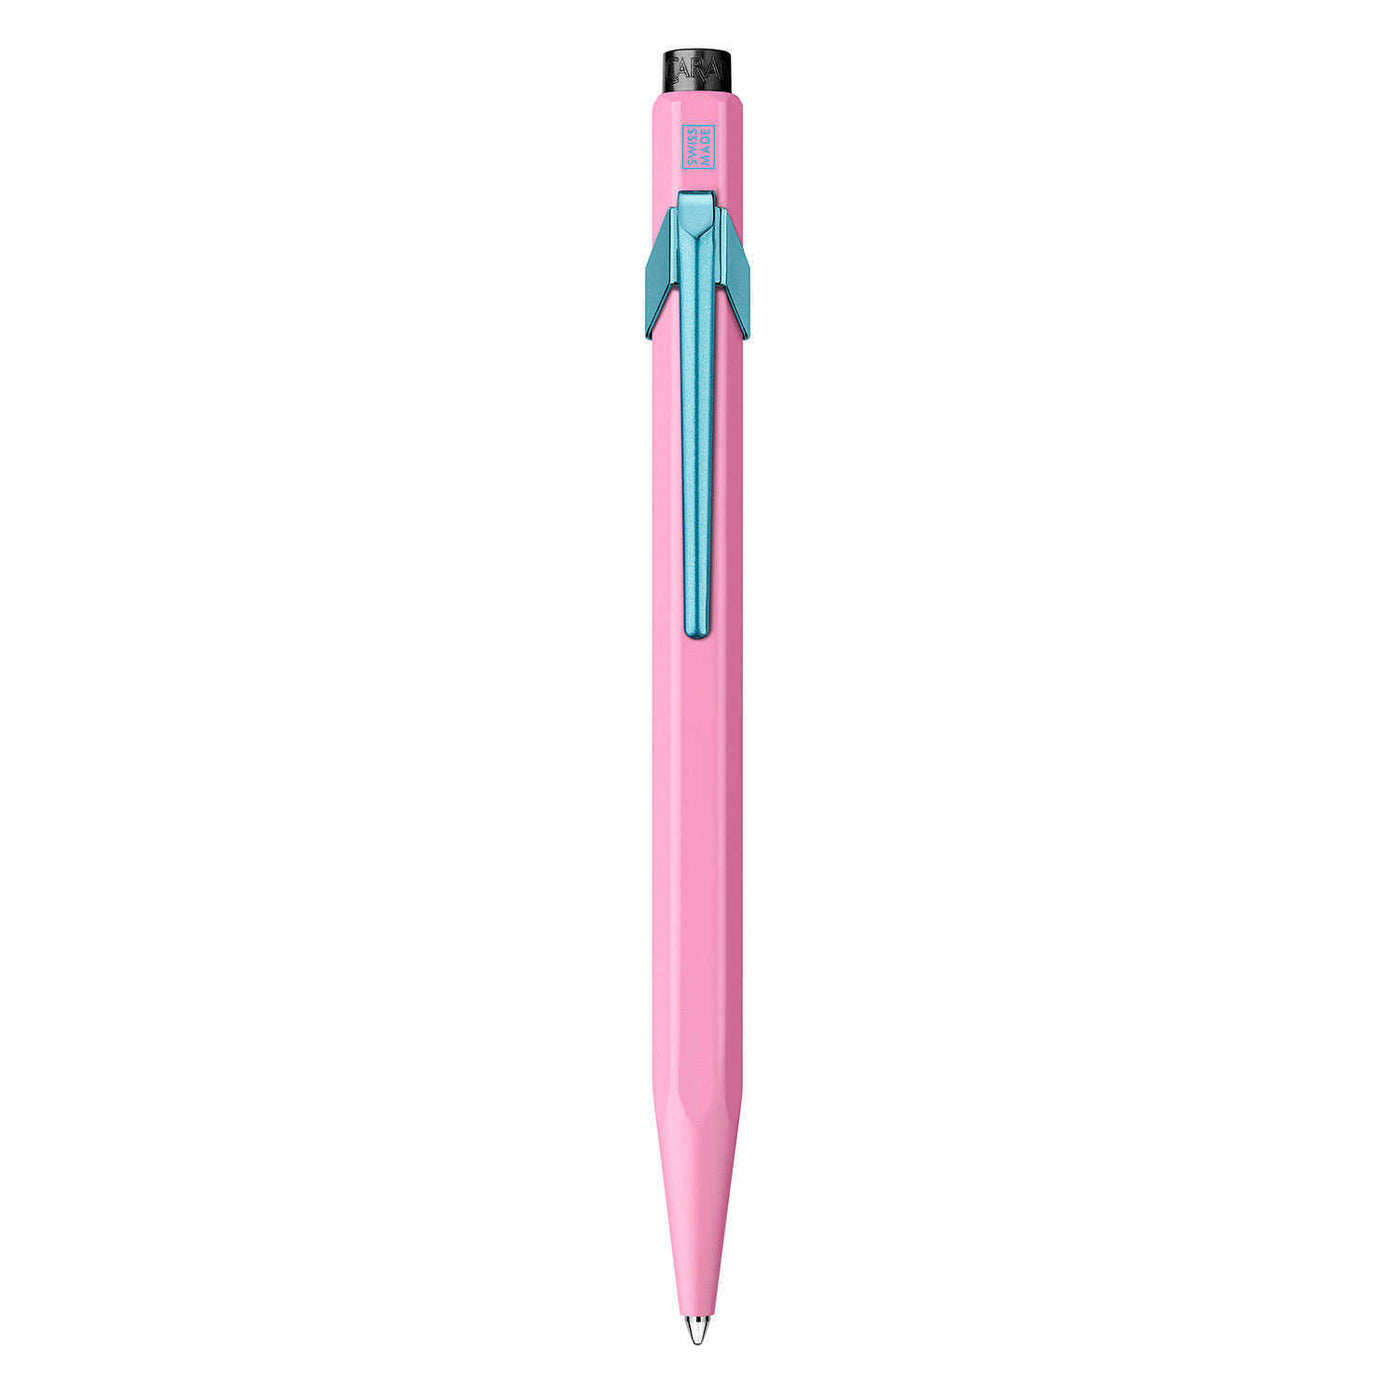 Caran d'Ache 849 Claim Your Style Ball Pen - Hibiscus Pink (Limited Edition) 2